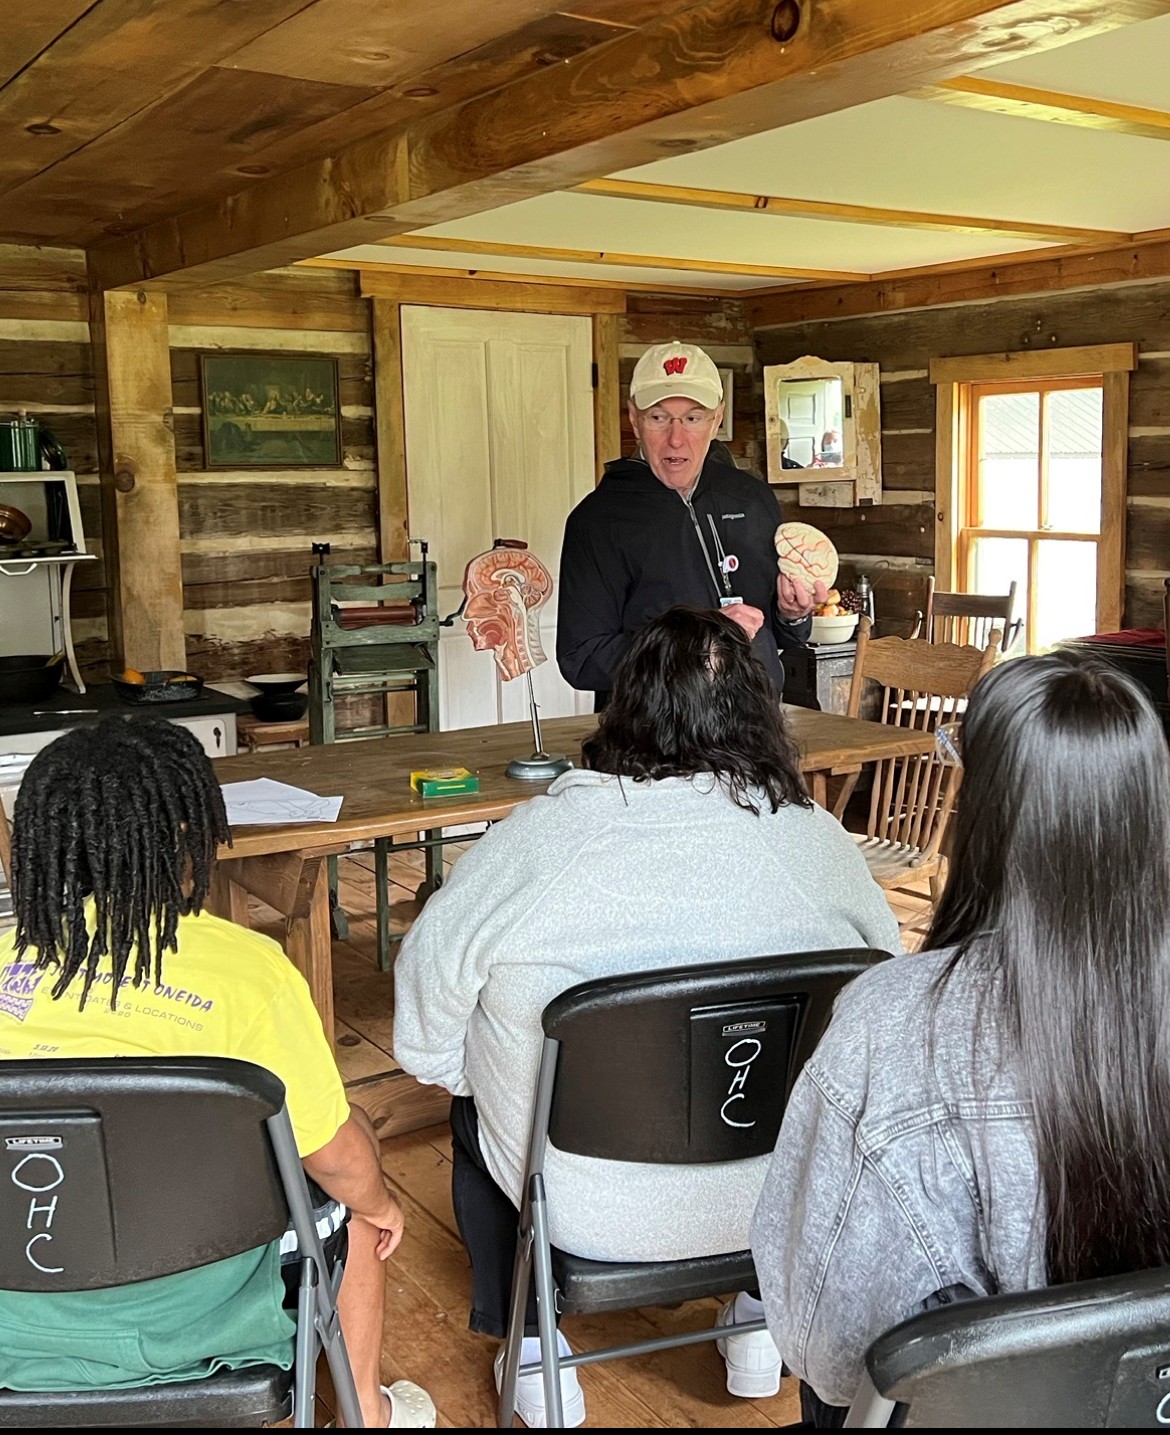 Dr. Robert Dempsey teaches tribal families about the intersections between traditional teachings and modern medicine.